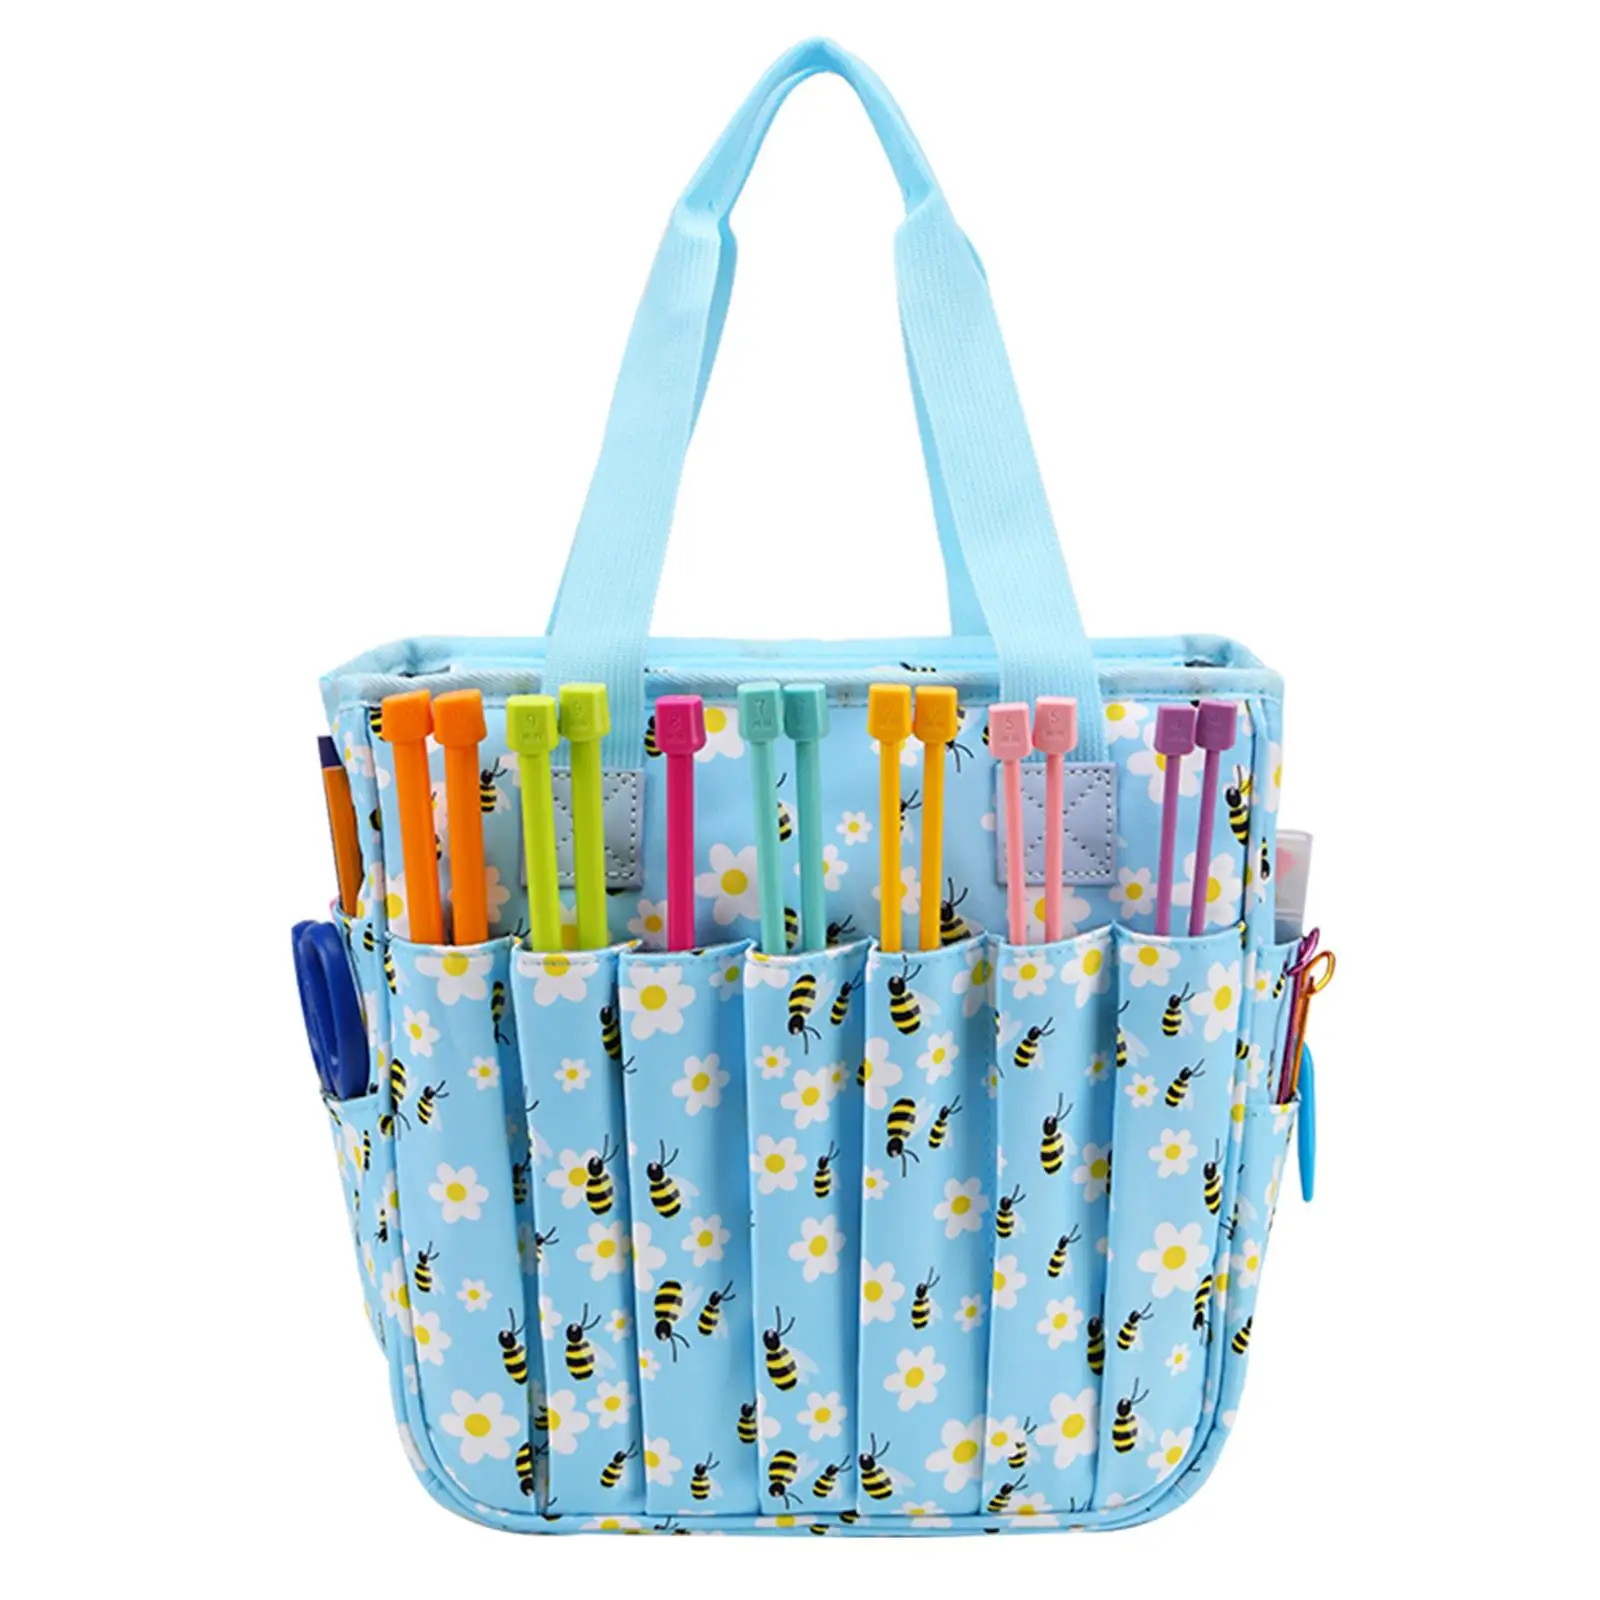 Knitting Tote Bag Organizer Bag Only 600D Oxford Cloth Yarn Tote Large Capacity Crochet Supplies for Crochet Hooks Crochet Bags